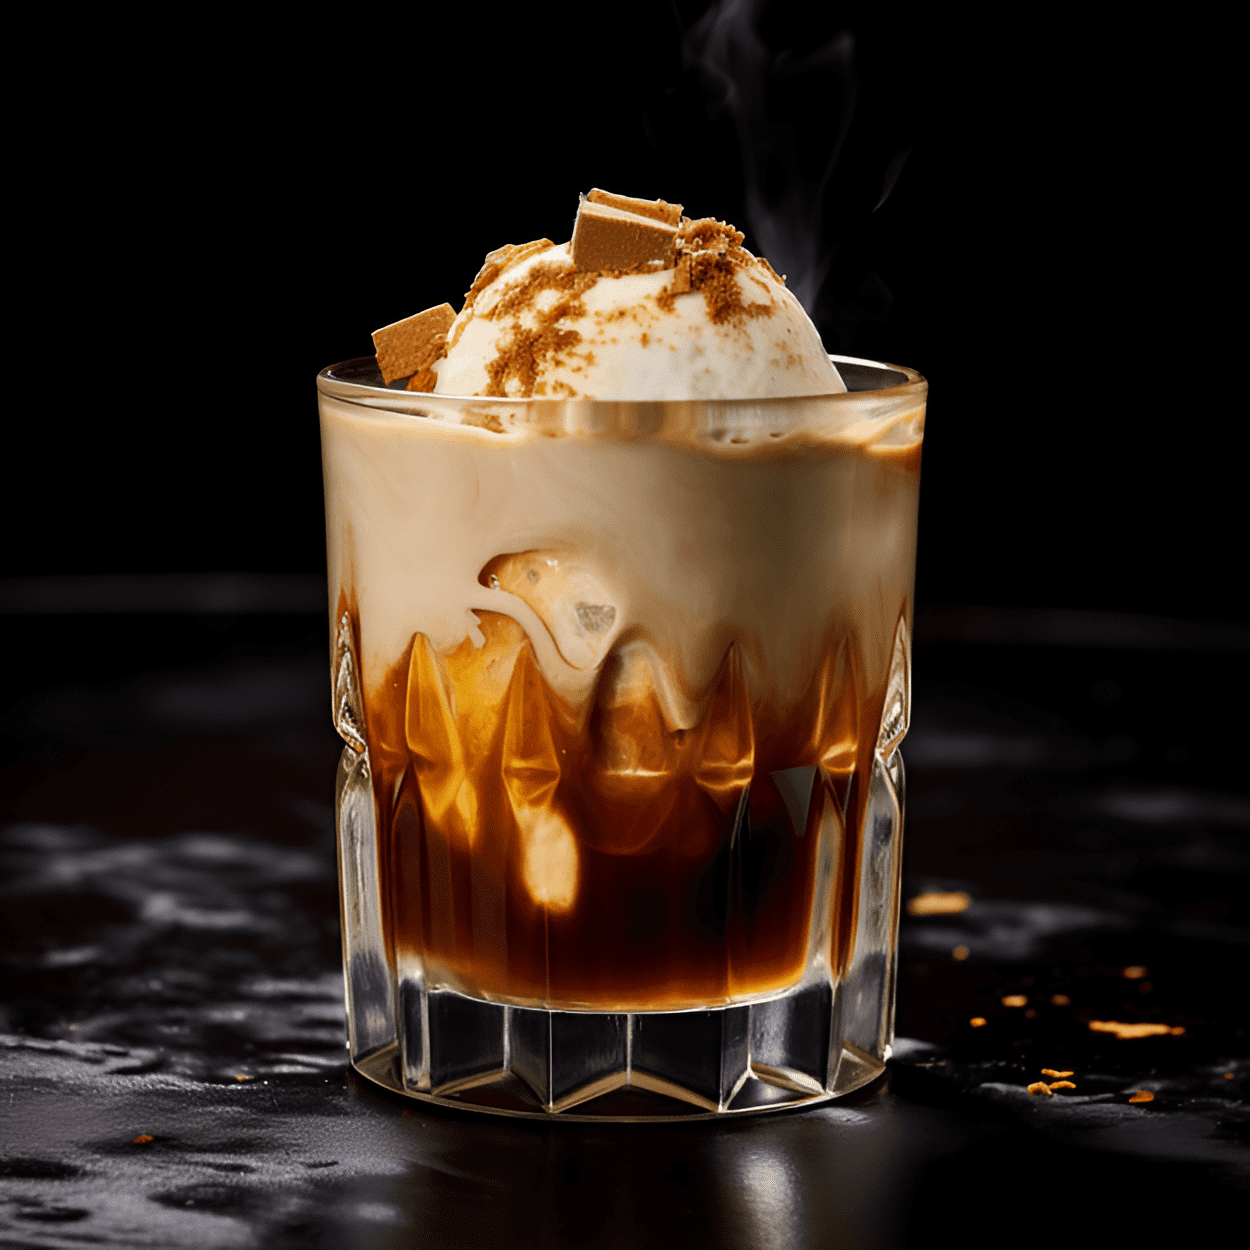 Hazelnut White Russian Cocktail Recipe - The Hazelnut White Russian is a rich, creamy, and sweet cocktail with a hint of nuttiness from the hazelnut. It has a smooth and velvety texture, with the vodka providing a subtle kick that balances the sweetness.